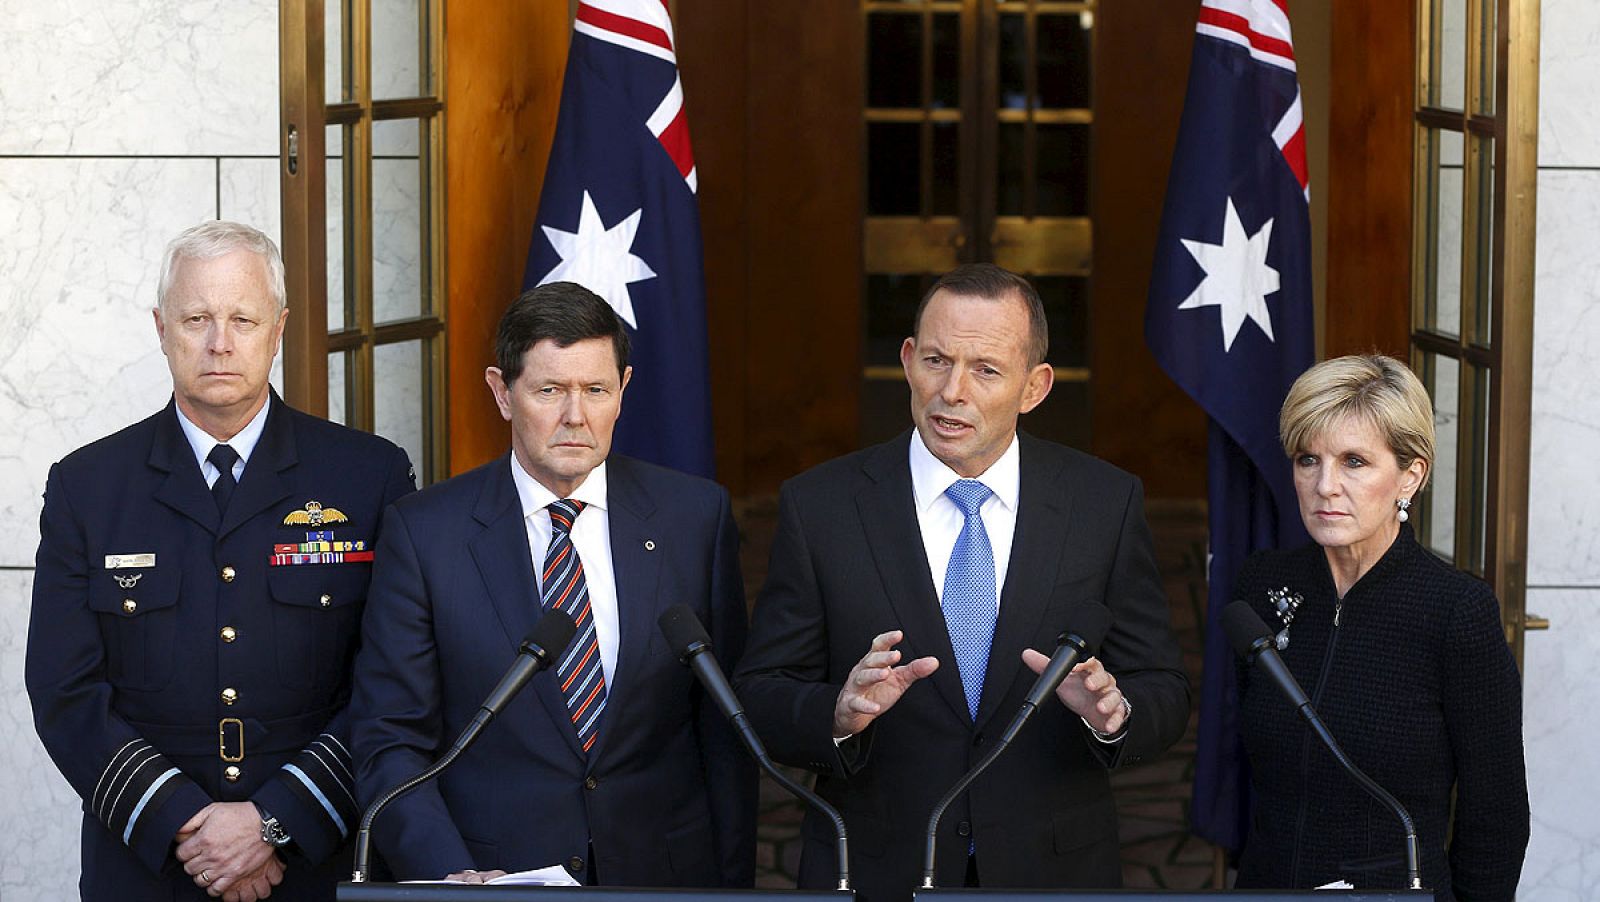 Australian Prime Minister Tony Abbott announces Australia's acceptance of Syrian refugees alongside Binskin, Defence Minister Kevin Andrews and Foreign Minister Julie Bishop at Parliament House in Canberra